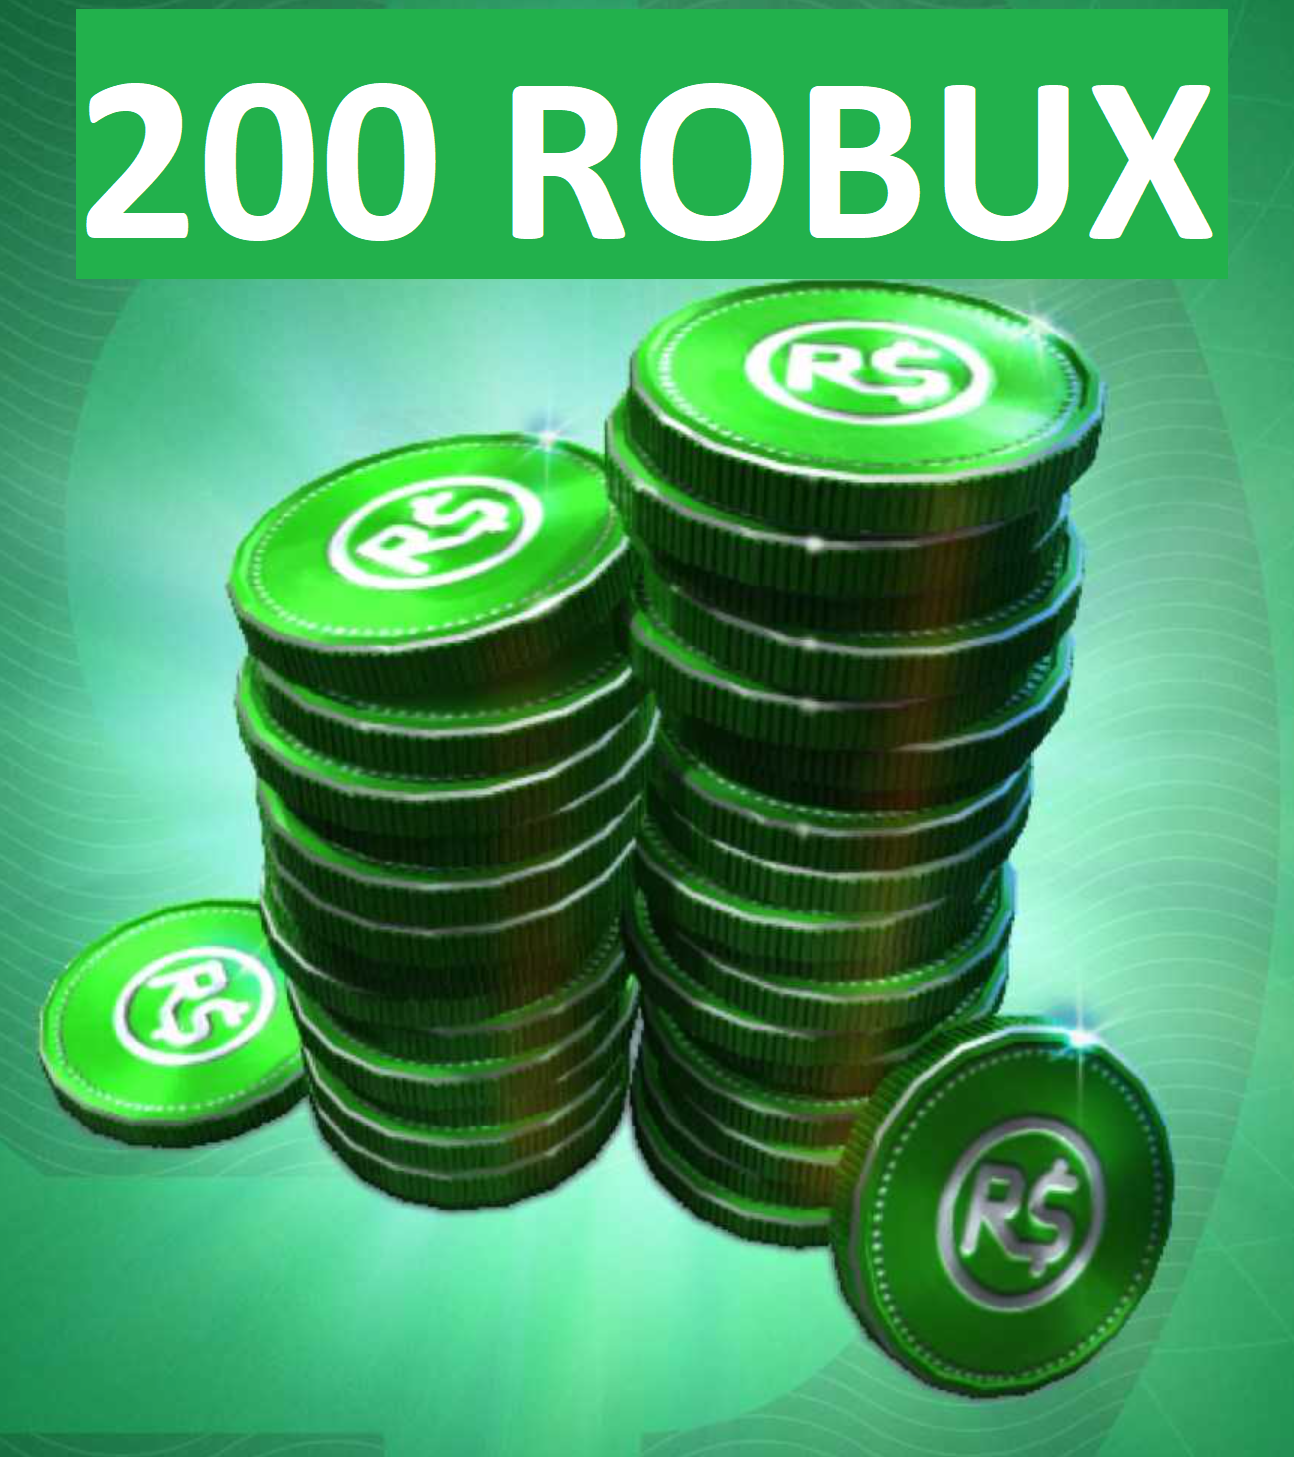 Buy Roblox Gift Card 200 Robux Global And Download - robux gift card 10 euro